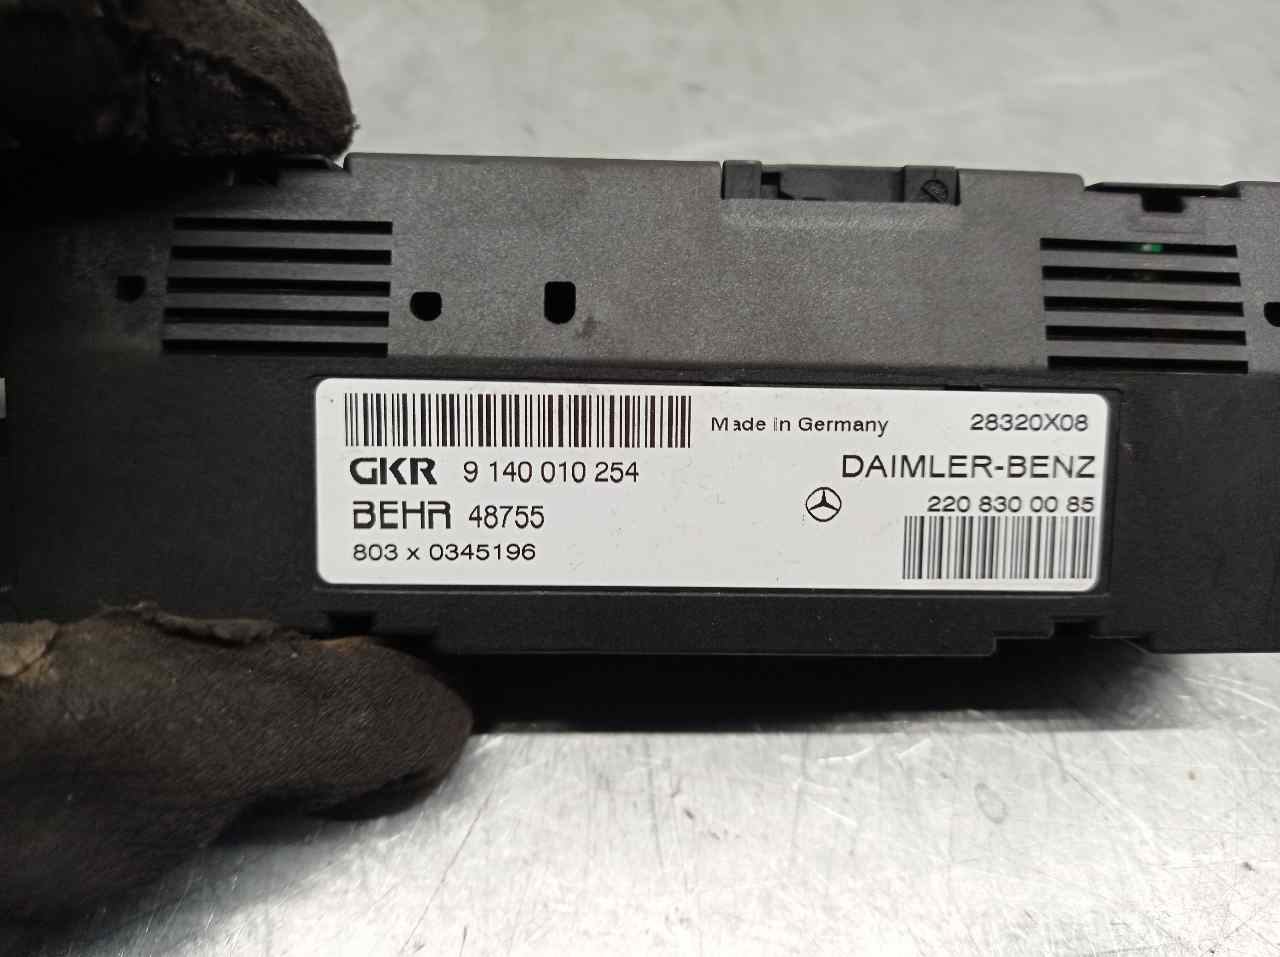 MERCEDES-BENZ S-Class W220 (1998-2005) Other Control Units 2208300085, 9140010254, GKR 19842507